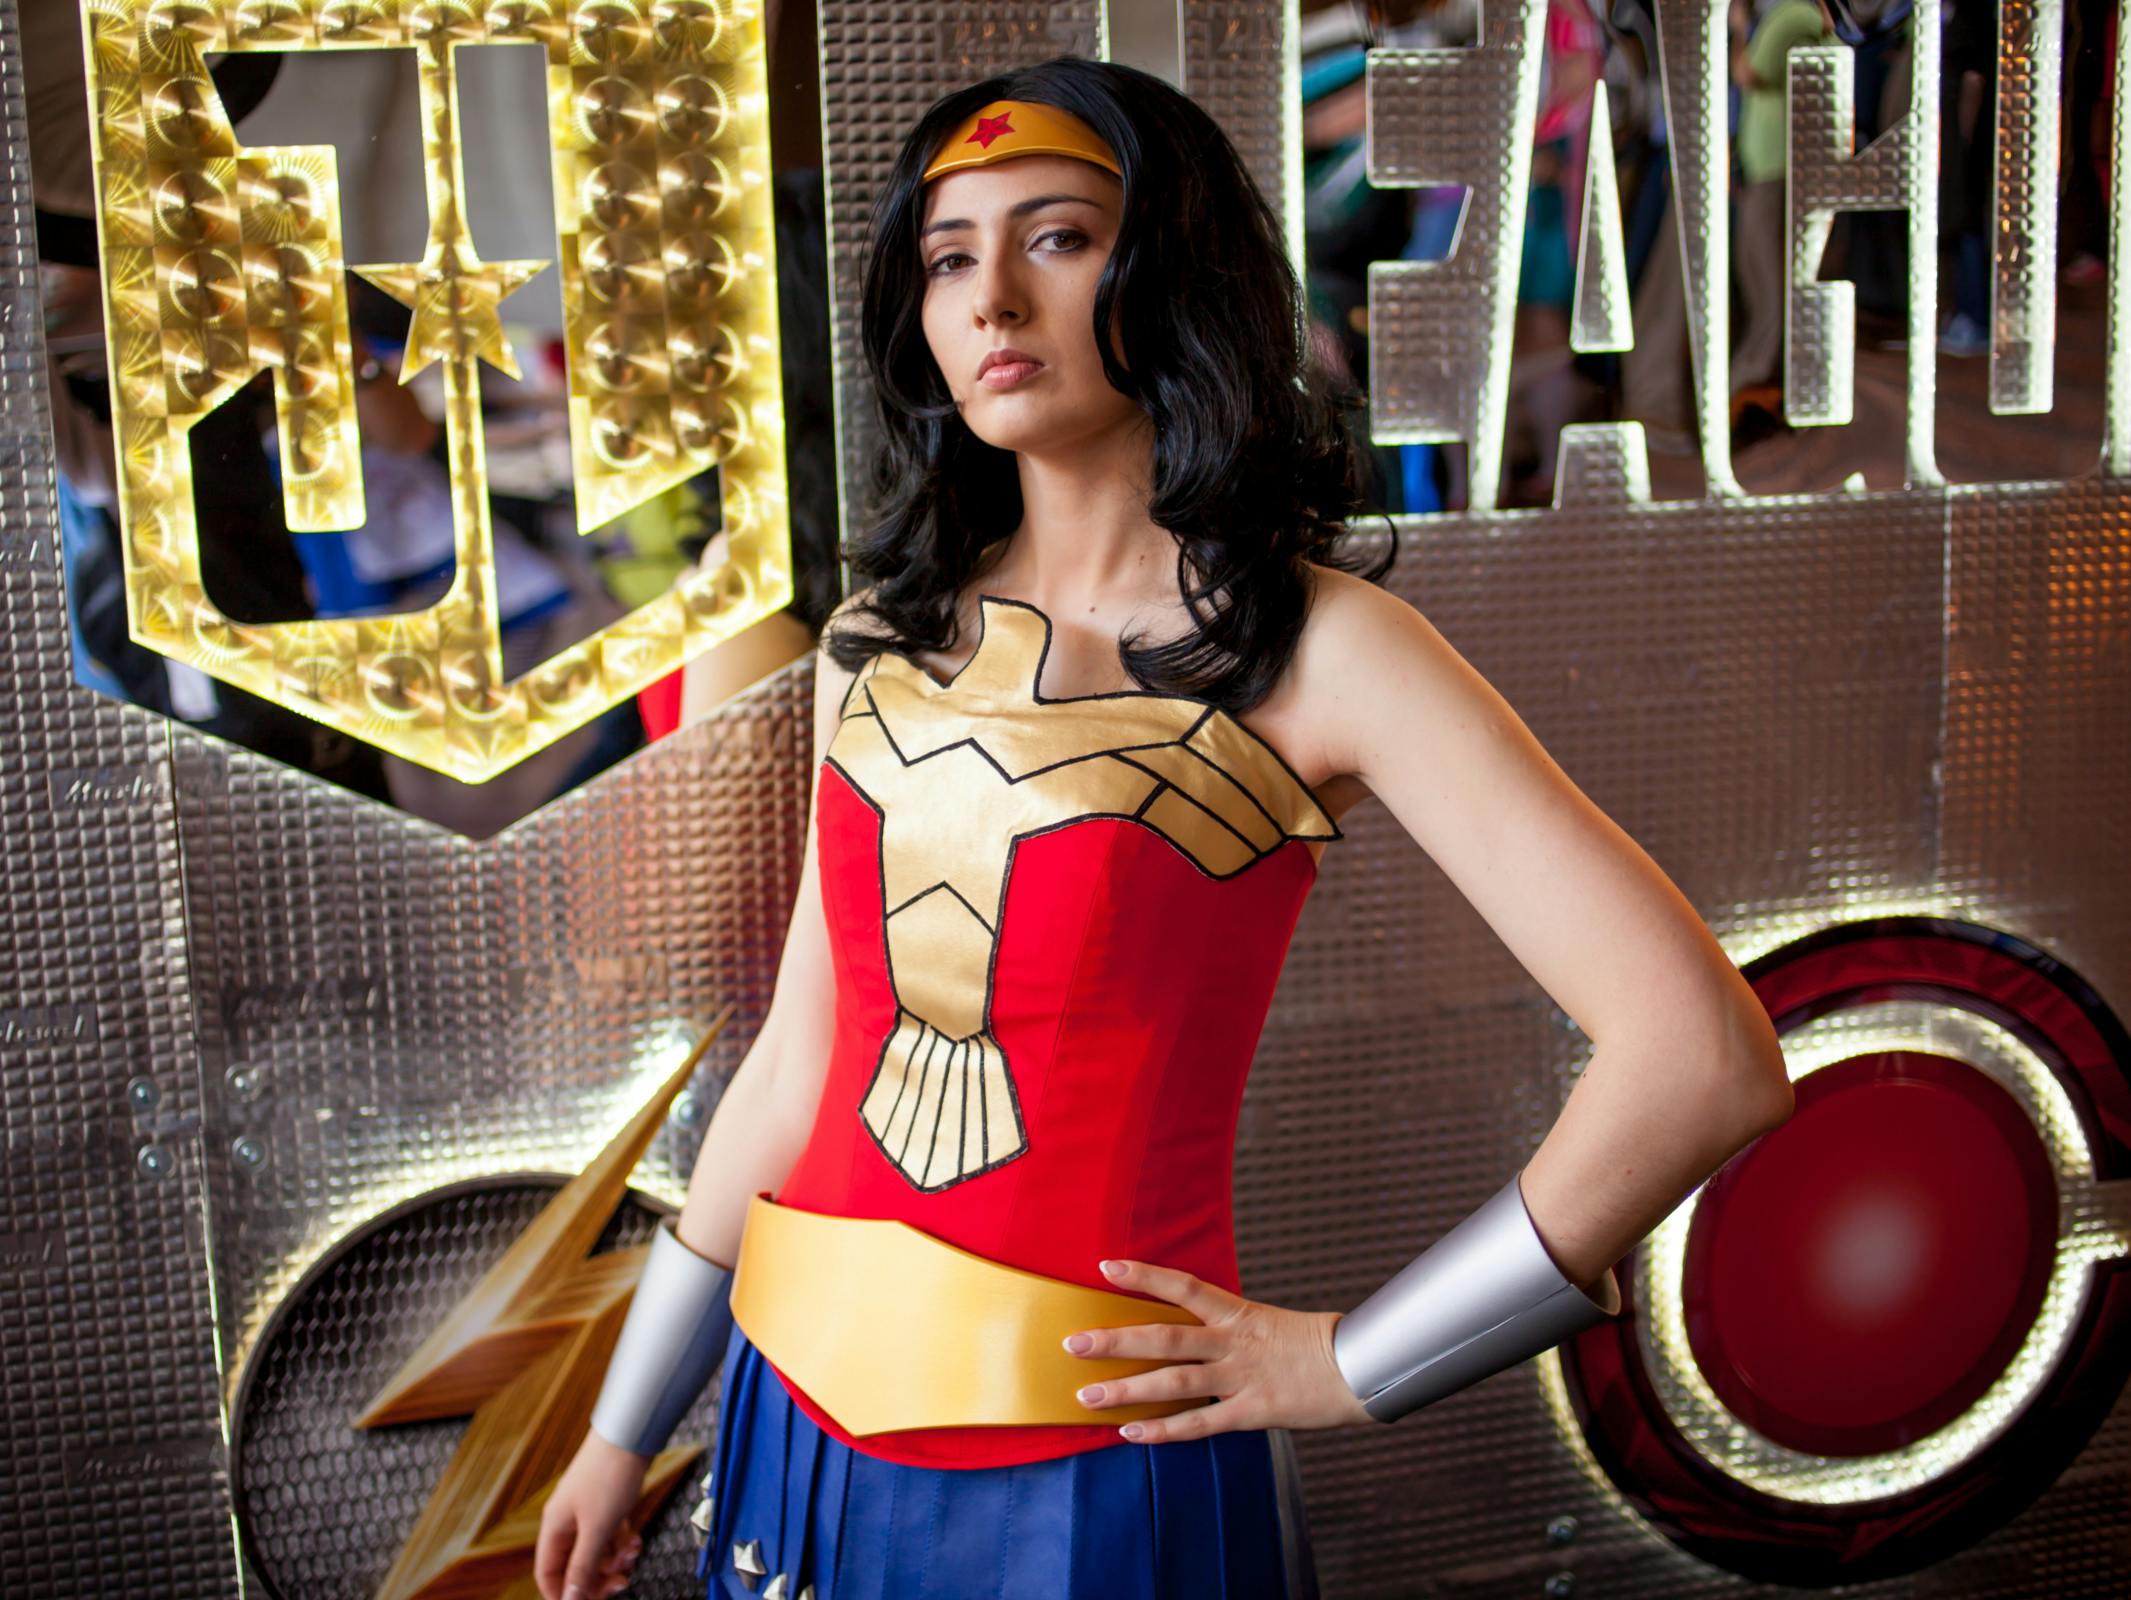 A person dressed as Wonder Woman posing heroically.